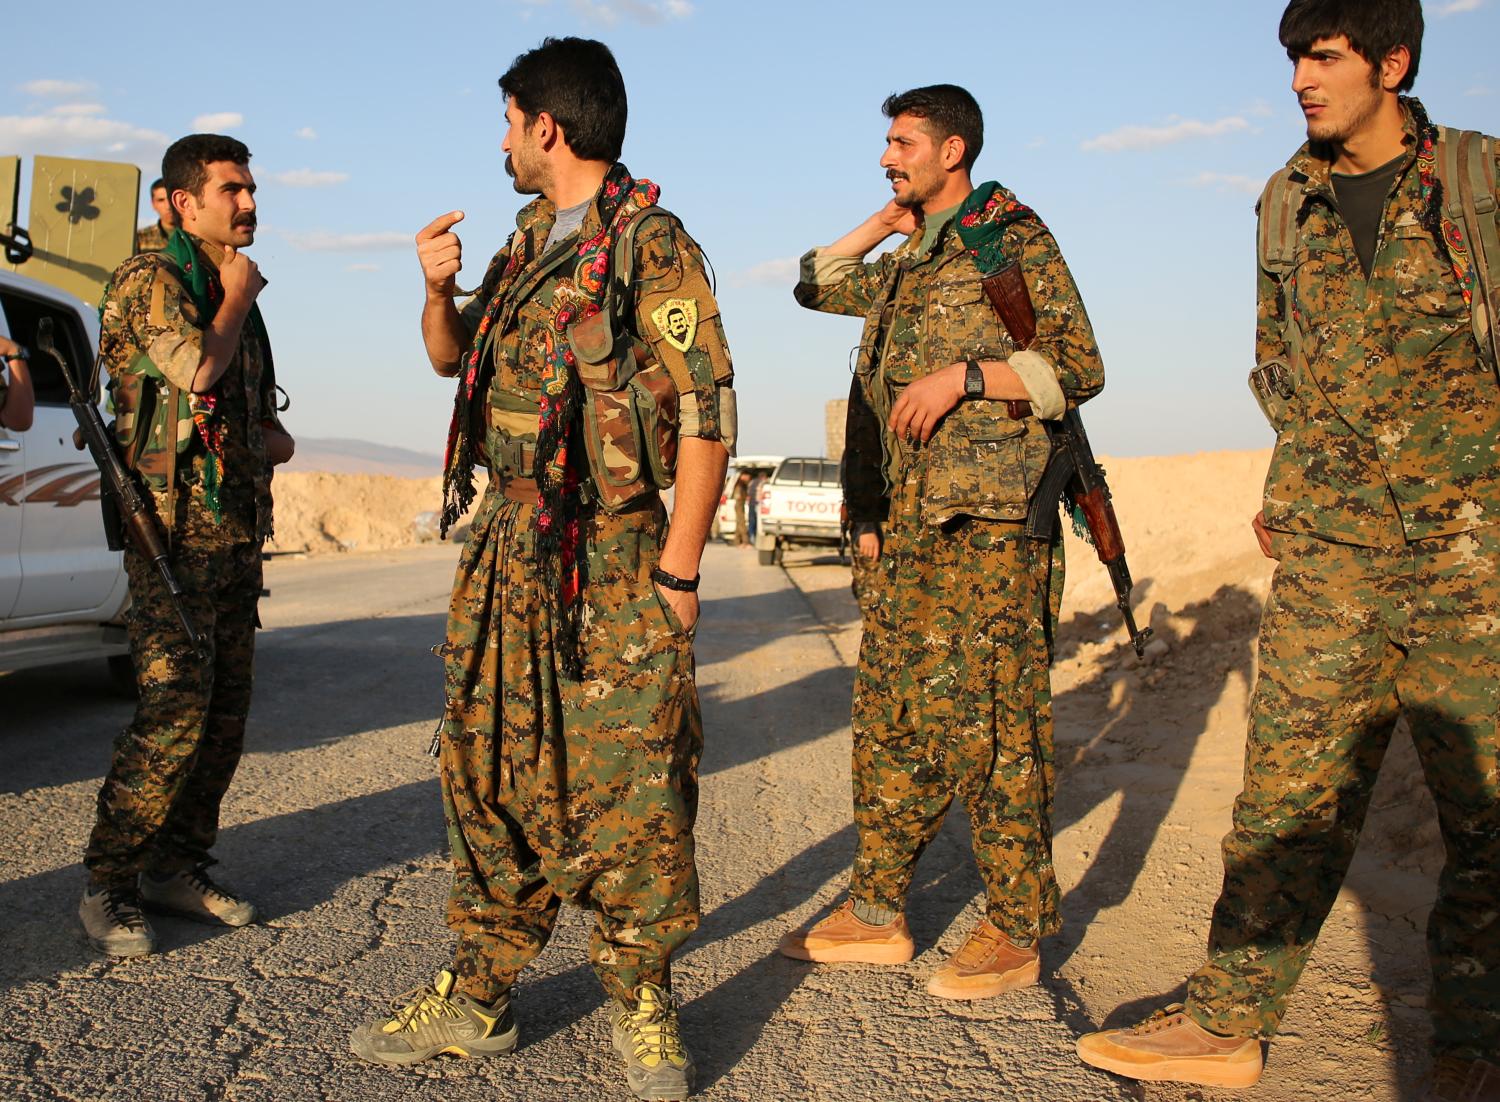 Members of the Sinjar Resistance Units (YBS), a militia affiliated with the Kurdistan WorkersÕ Party (PKK), stand in the village of Umm al-Dhiban, northern Iraq, April 29, 2016. They share little more than an enemy and struggle to communicate on the battlefield, but together two relatively obscure groups have opened up a new front against Islamic State militants in a remote corner of Iraq. The unlikely alliance between the Sinjar Resistance Units, an offshoot of a leftist Kurdish organisation, and Abdulkhaleq al-Jarba, a Arab tribal militia is a measure of the extent to which Islamic State has upended the regional order. Across Iraq and Syria, new groups have emerged where old powers have waned, competing to claim fragments of territory from Islamic State and complicating the outlook when they win. REUTERS/Goran Tomasevic SEARCH "YBS TOMASEVIC" FOR THIS STORY. SEARCH "THE WIDER IMAGE" FOR ALL STORIES - RTX2DRRU